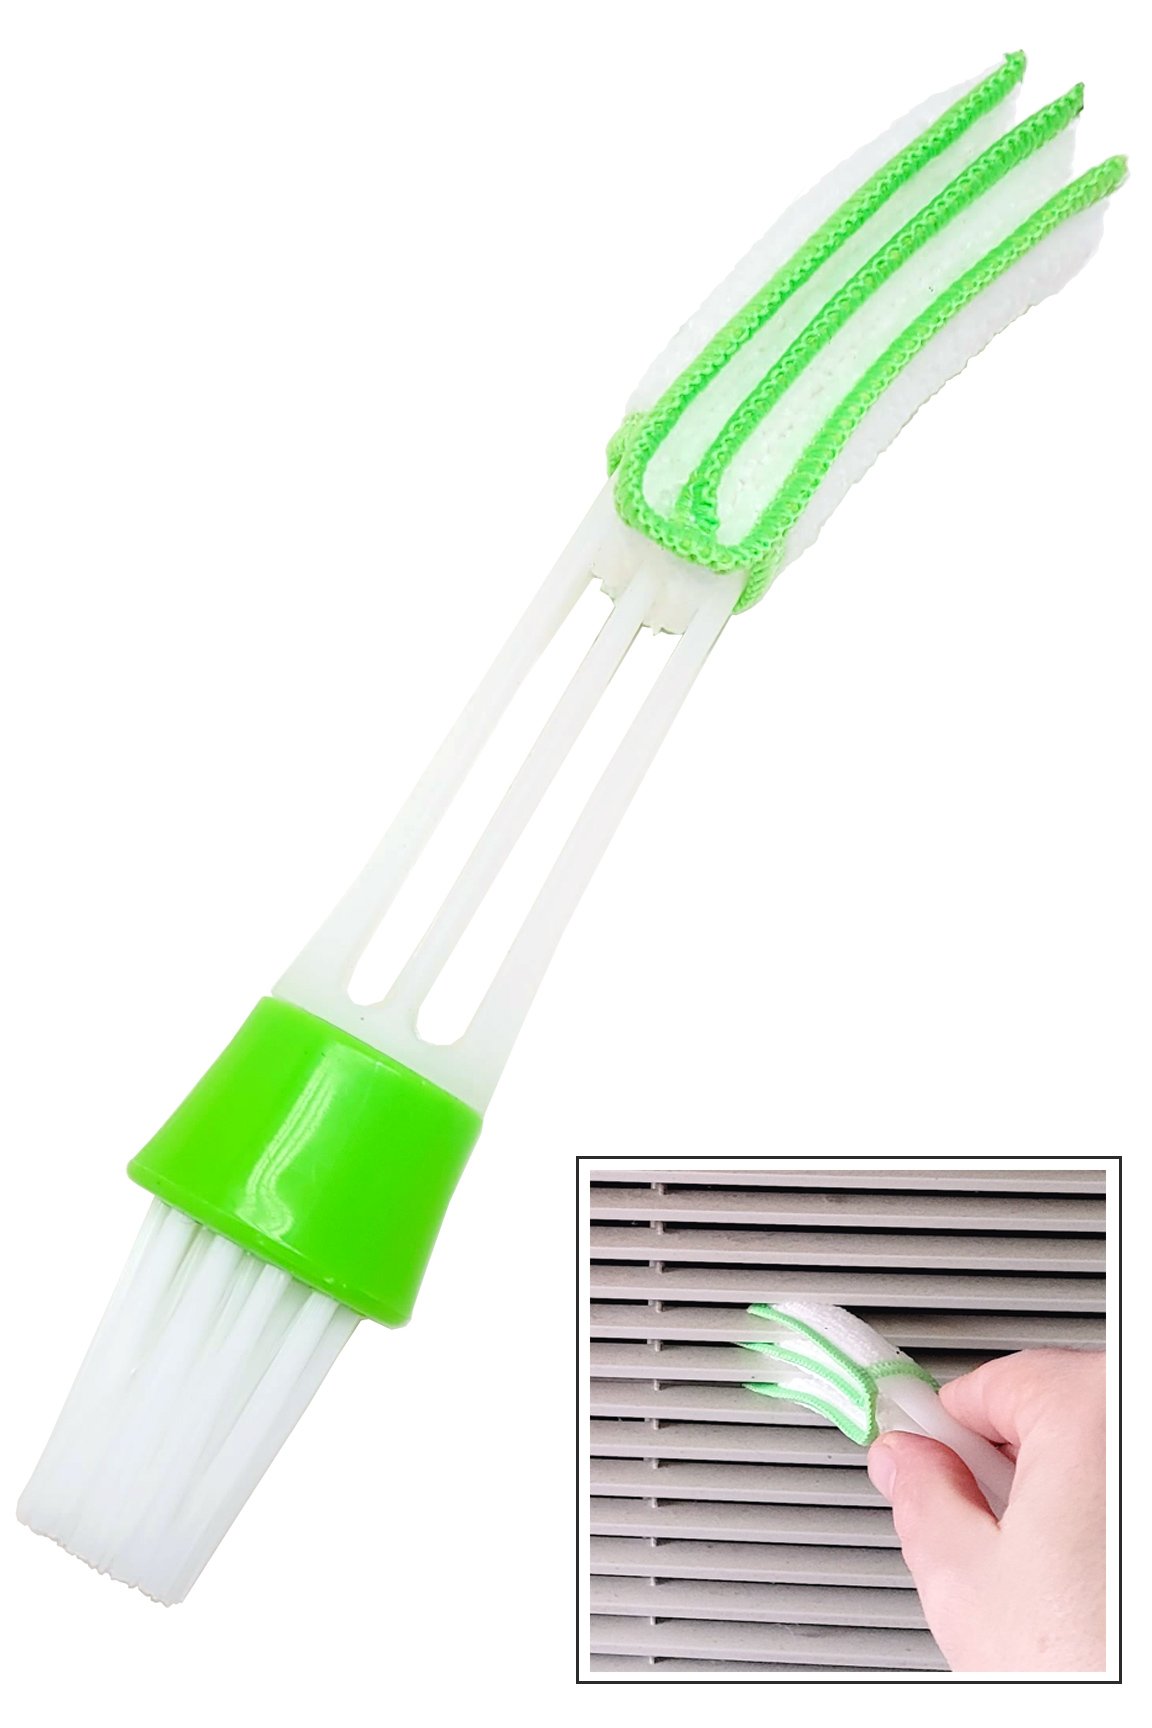 2-In-1 Vent Cleaning Tool